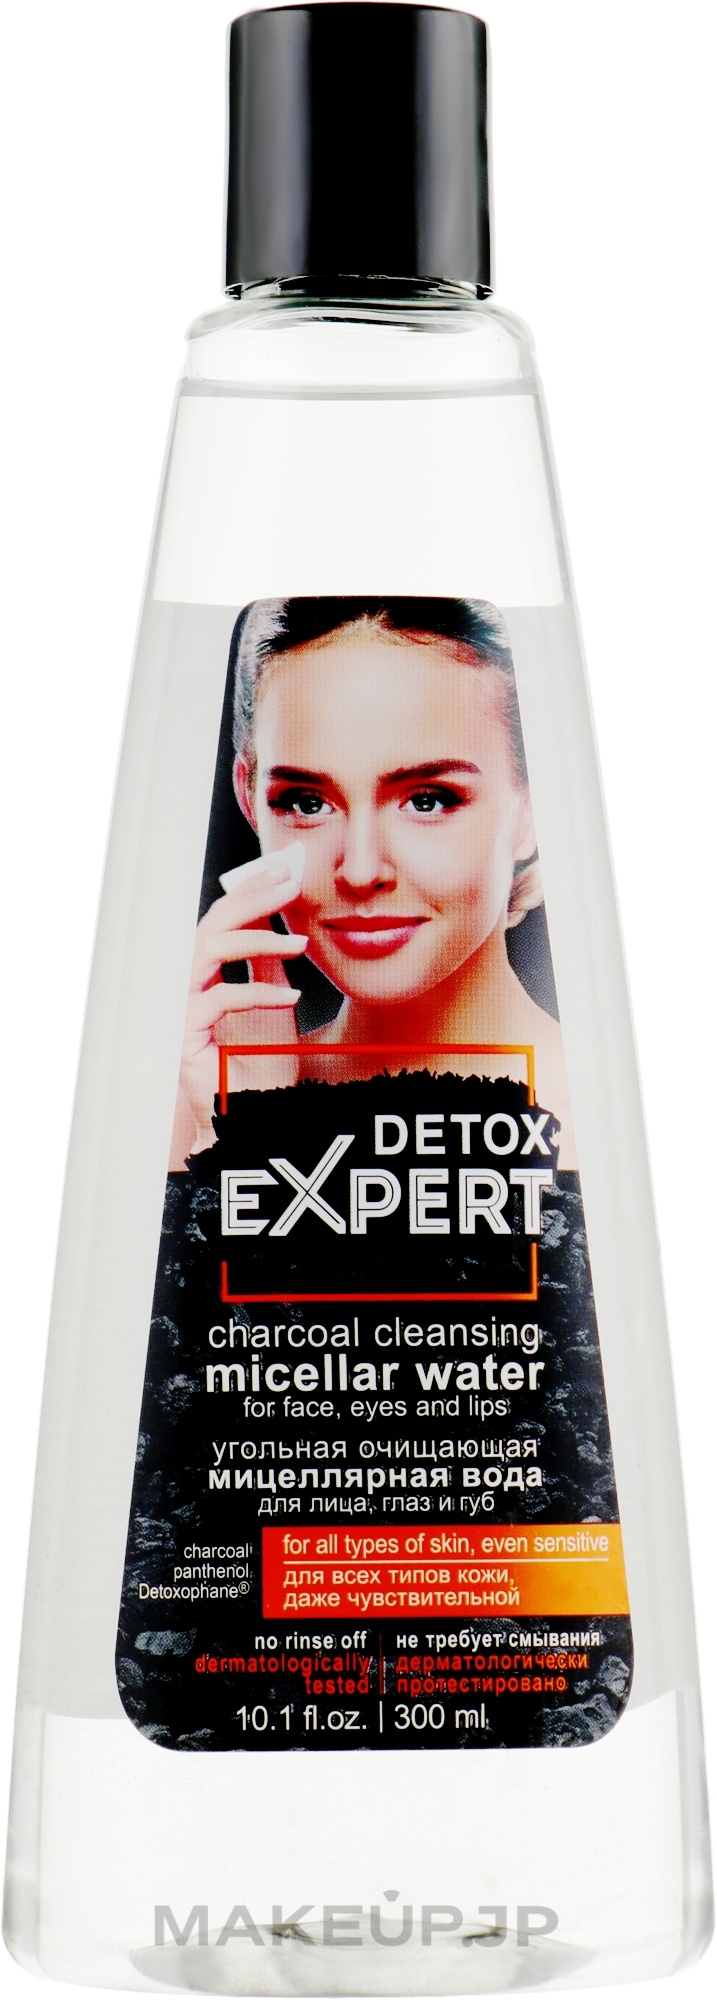 Cleansing Charcoal Micellar Water for All Skin Types - Detox Expert Charcoal Cleansing Micellar Water — photo 300 ml